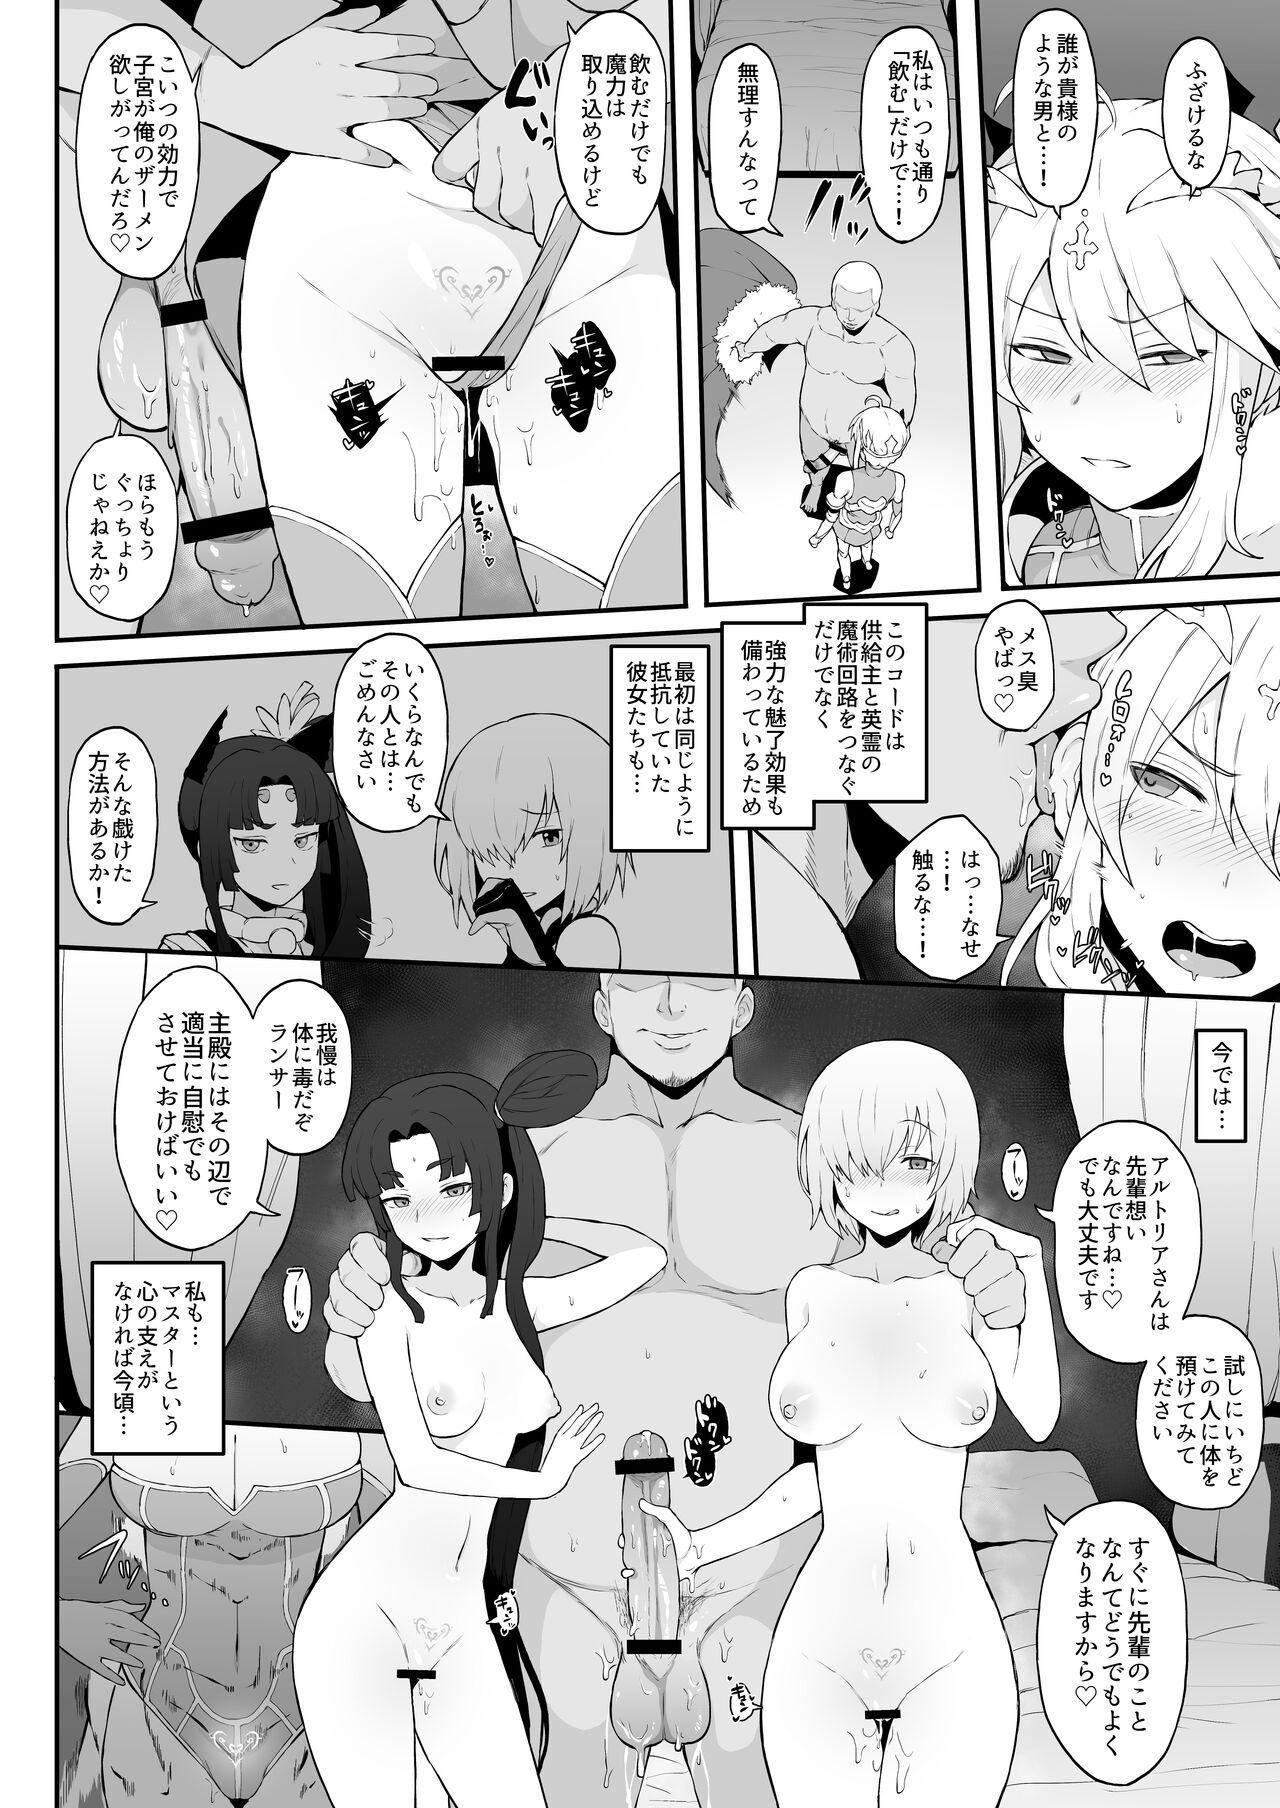 Hiddencam No Title - Fate grand order Trimmed - Page 6